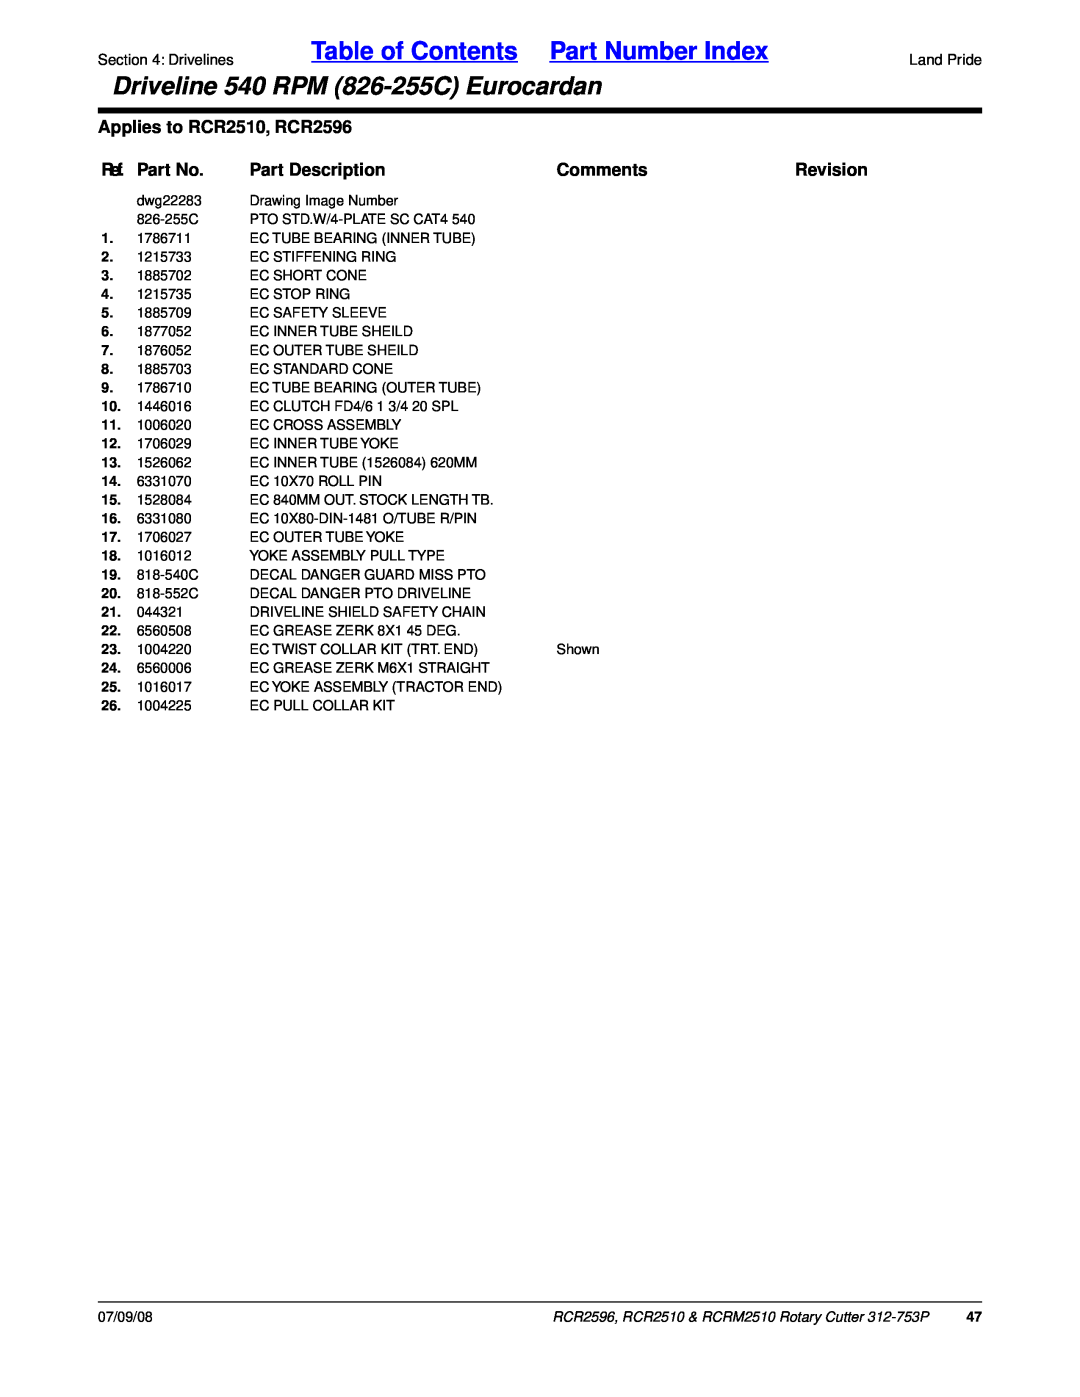 Land Pride manual Table of Contents Part Number Index, Driveline 540 RPM 826-255CEurocardan, Applies to RCR2510, RCR2596 